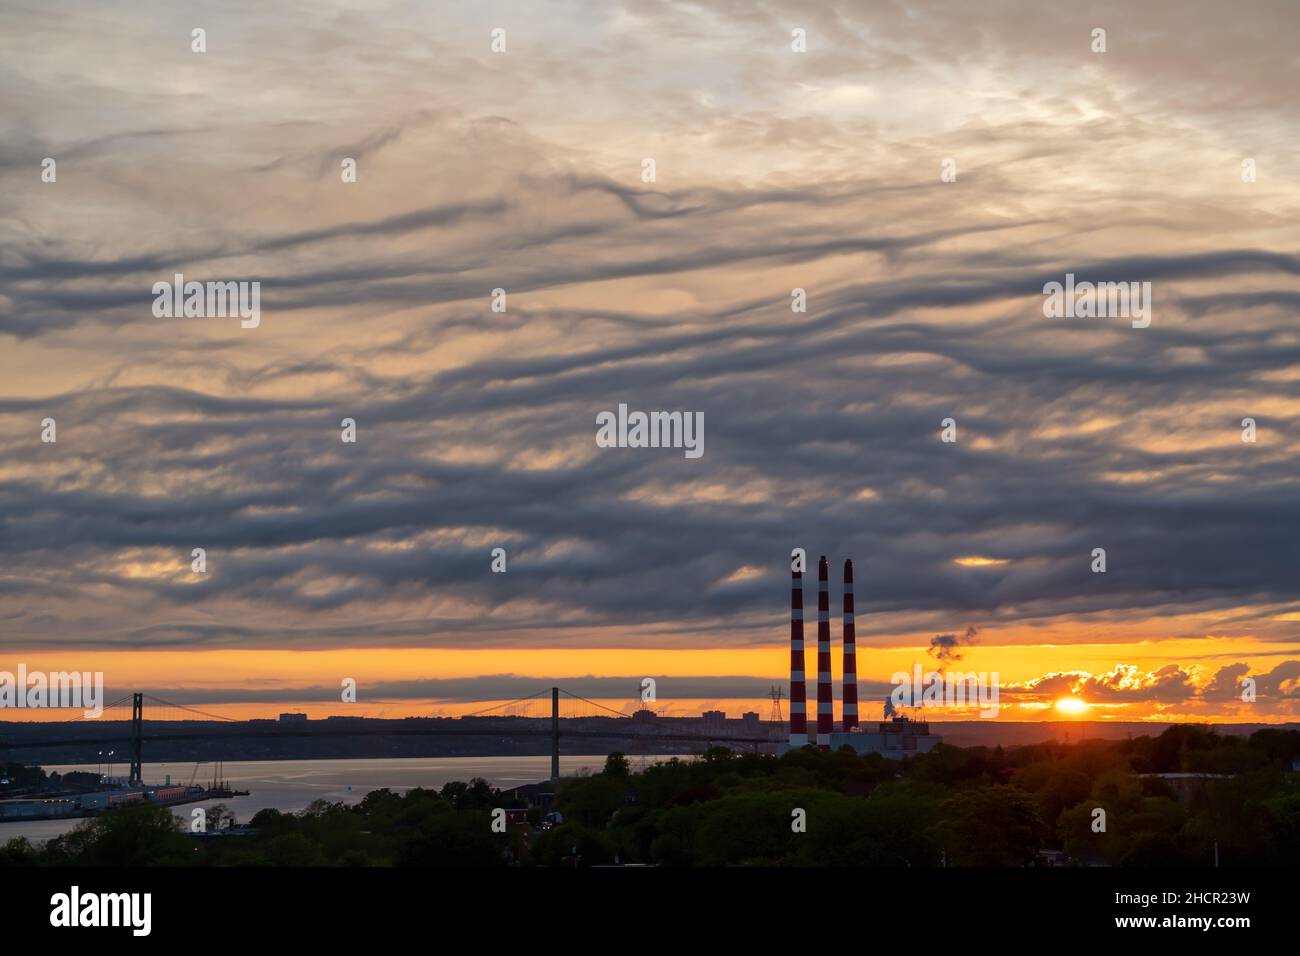 Power plant smoke stacks silhouetted against a dramatic sunset. Stock Photo